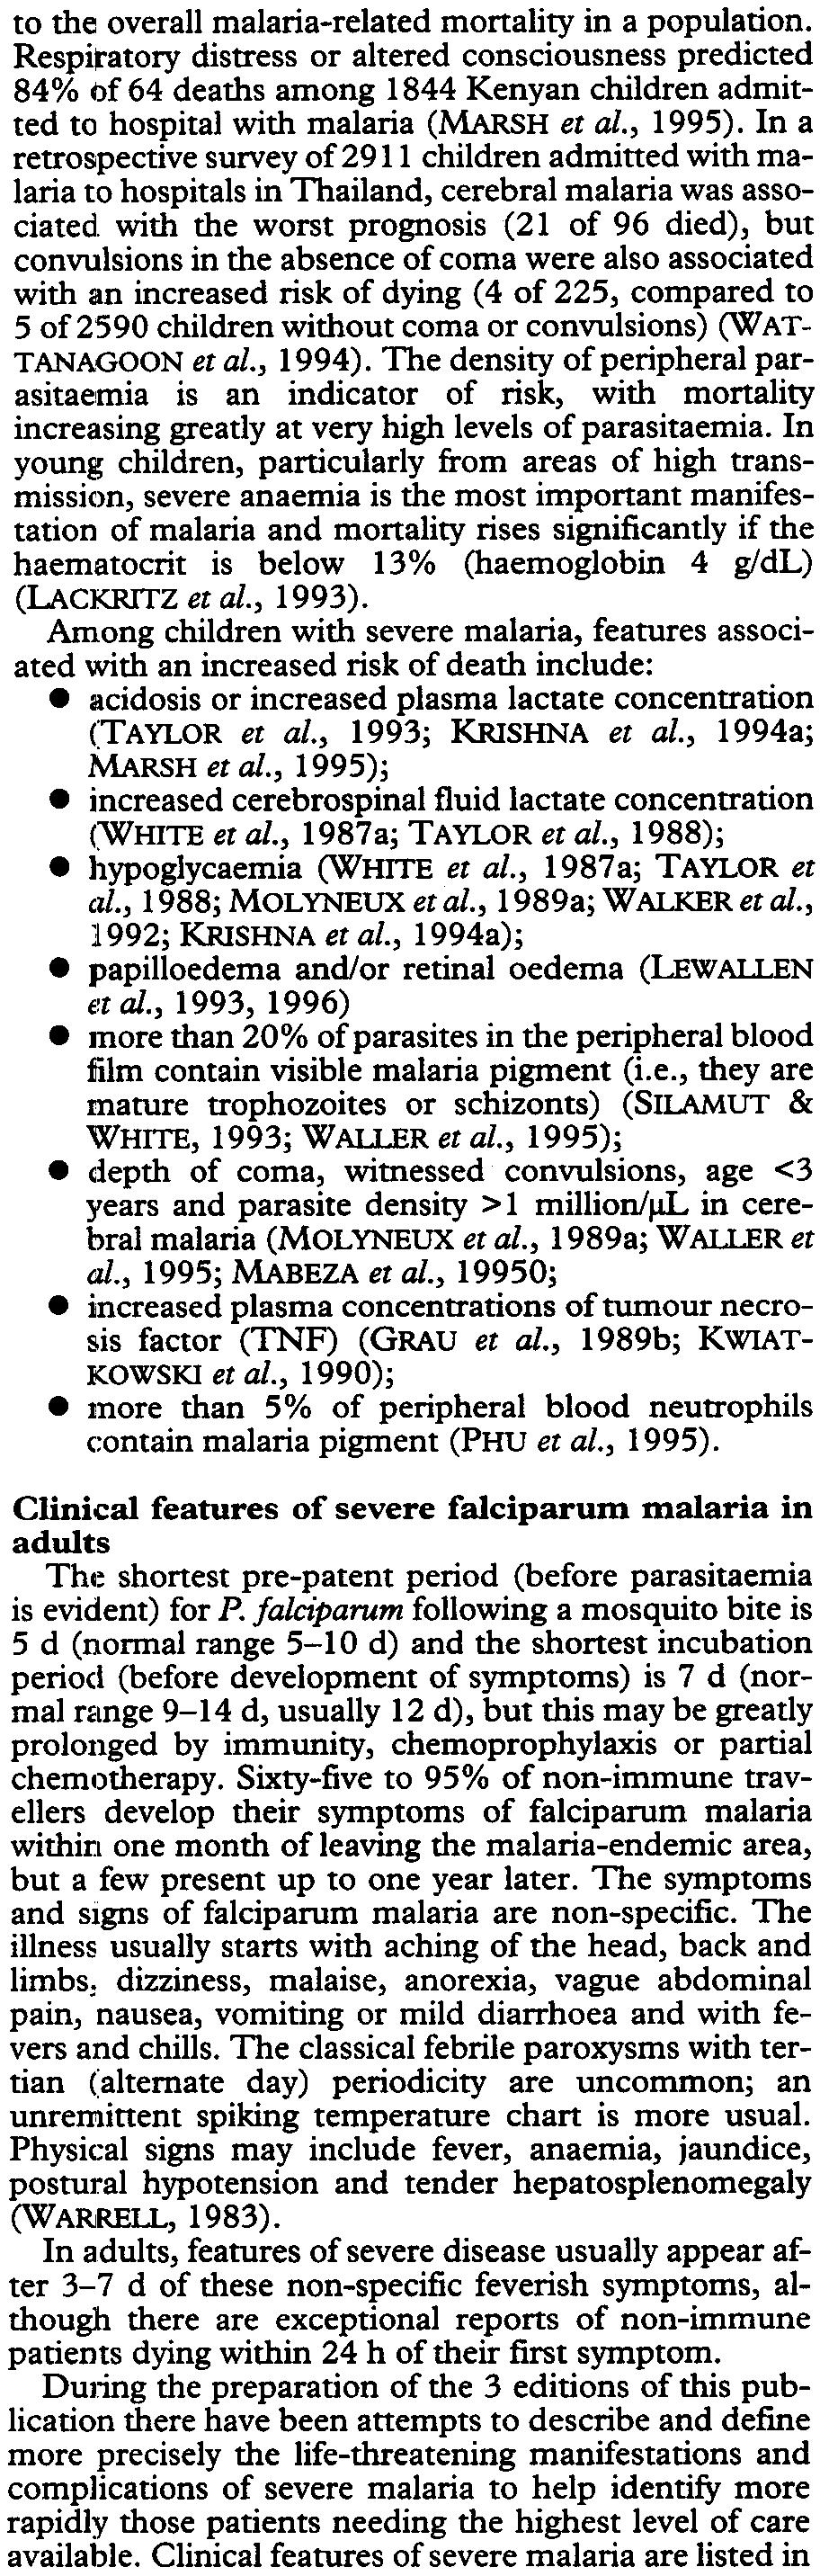 obnubilation, confusion and psychosis. To allow comparability of clinical and therapeutic findings, a strict definition of 'cerebral malaria' was recommended (WARRELL et al., 1982).